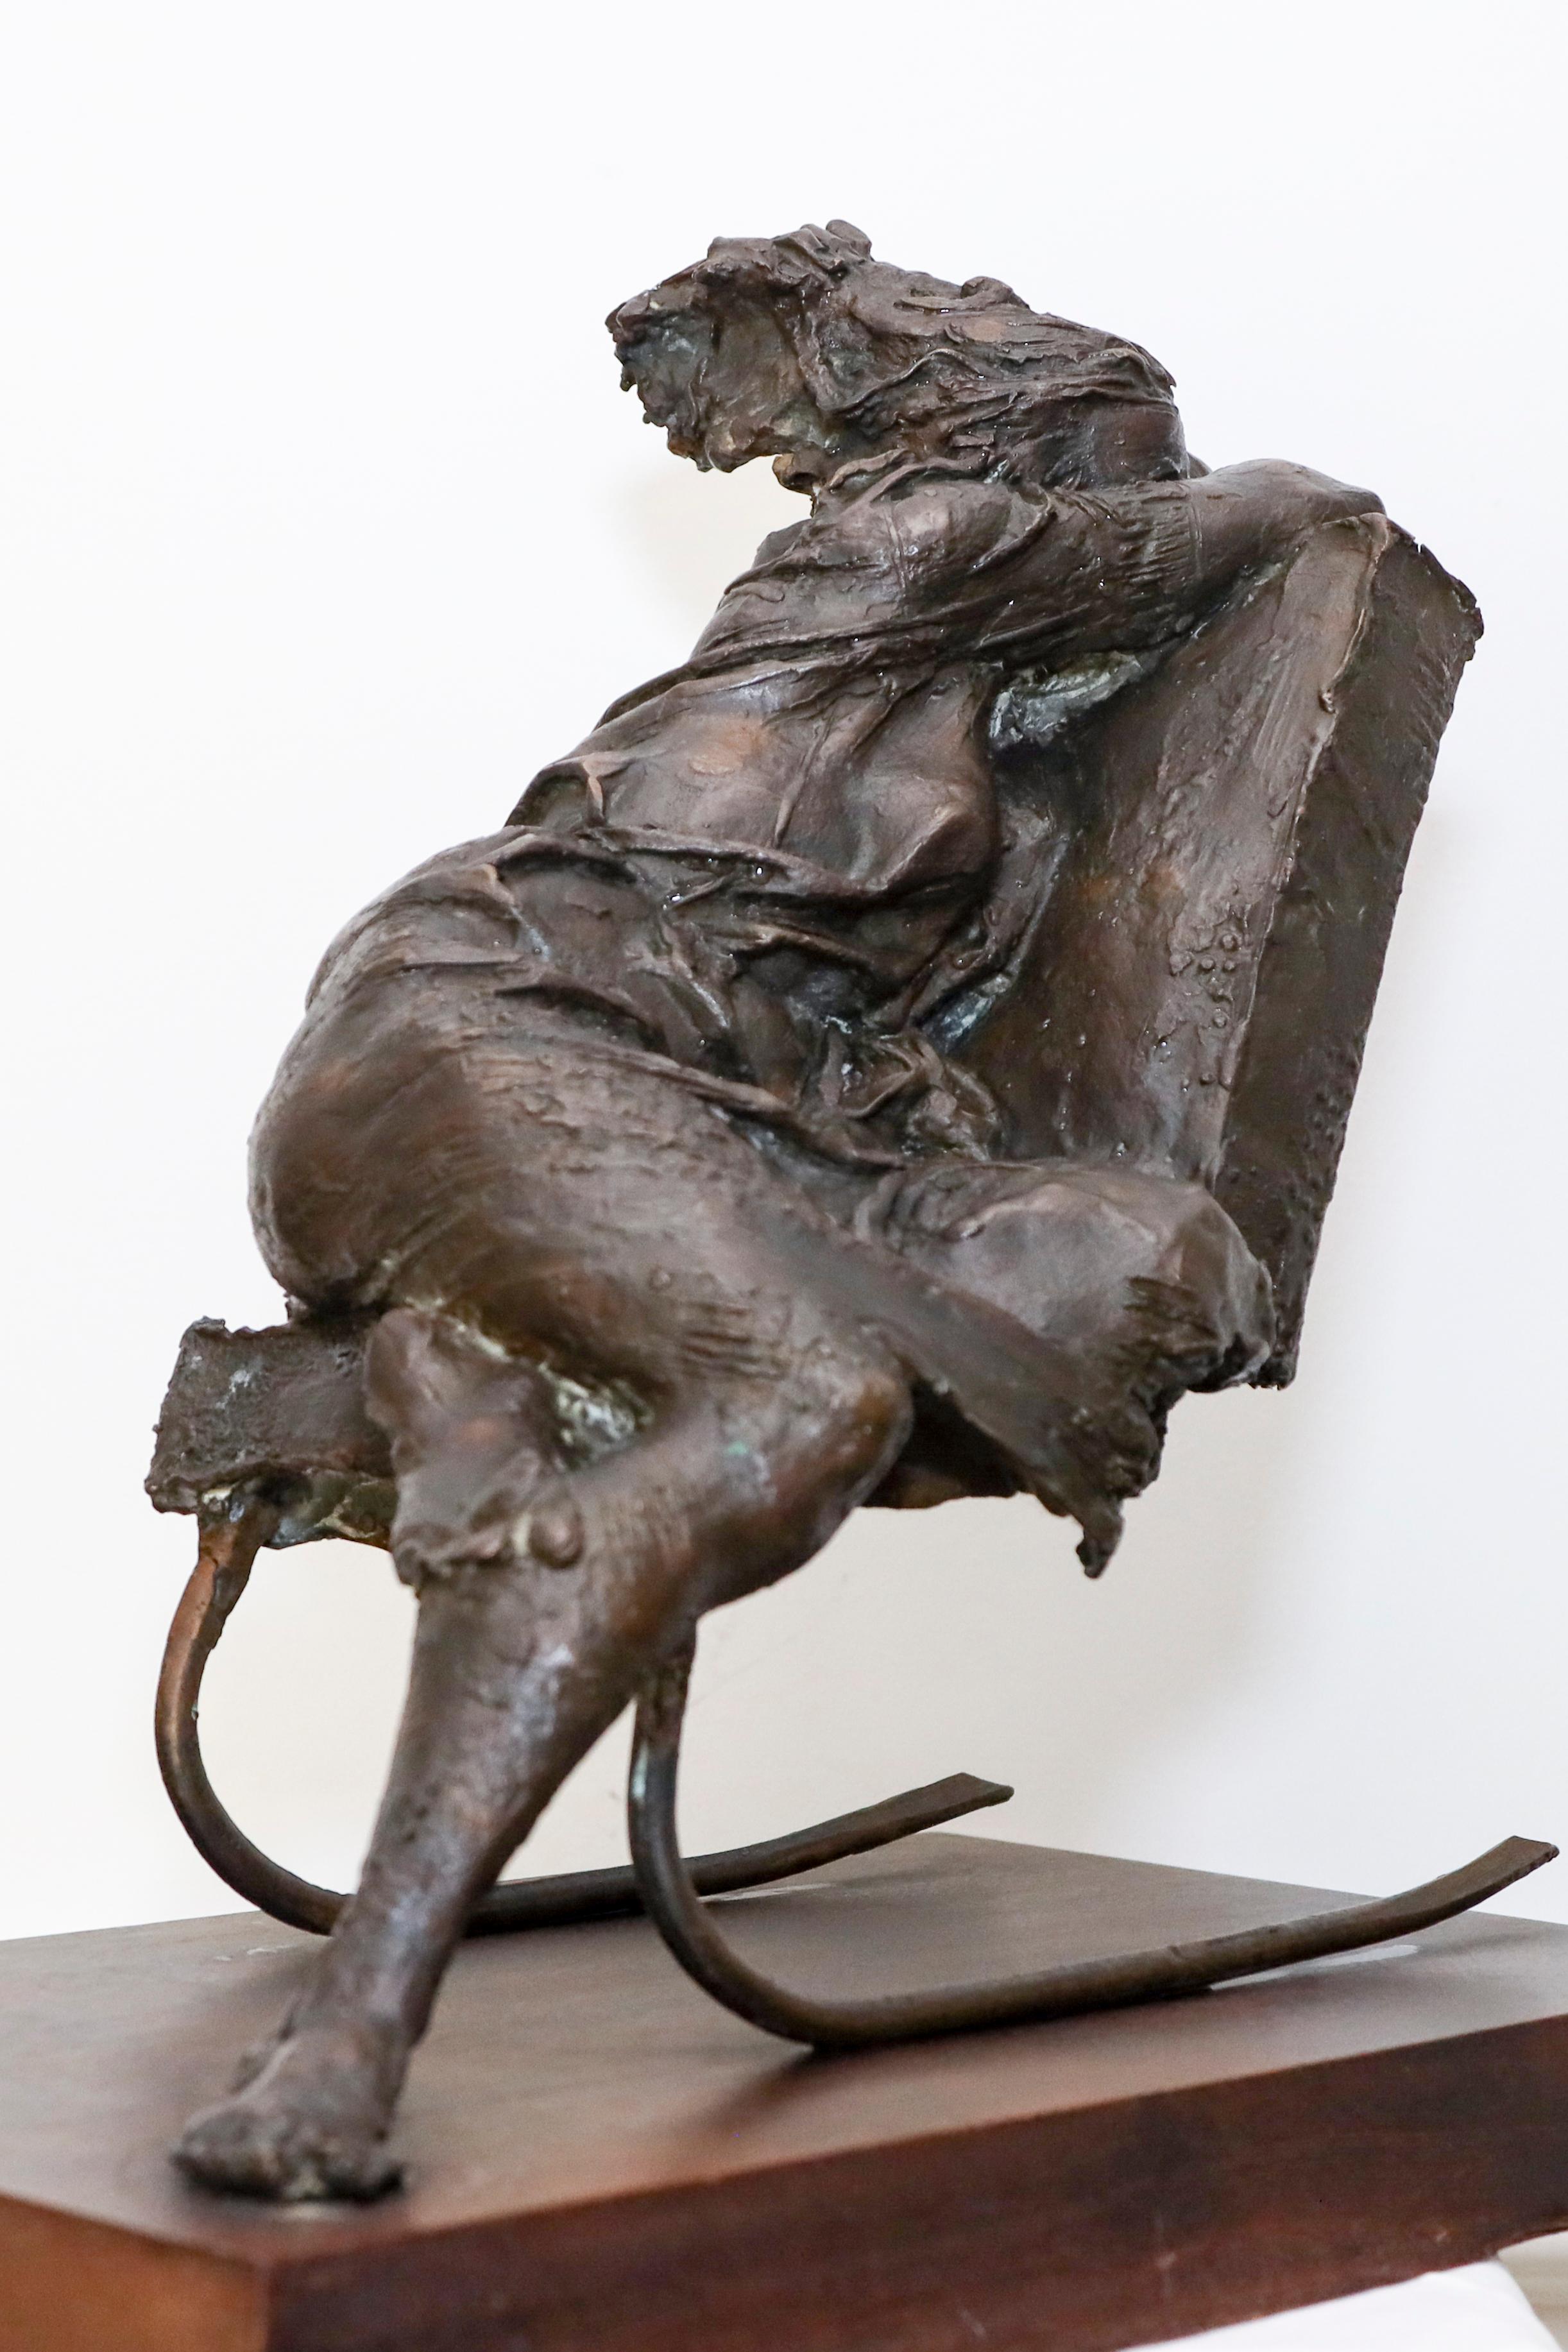 This bronze sculpture of a woman in a chair, is typical of the work of Bruno Lucchese.  Born in Italy in 1926, Bruno Lucchesi has been referred to as “the last of the Renaissance sculptors.” Lucchesi divides his time between New York and Italy. A